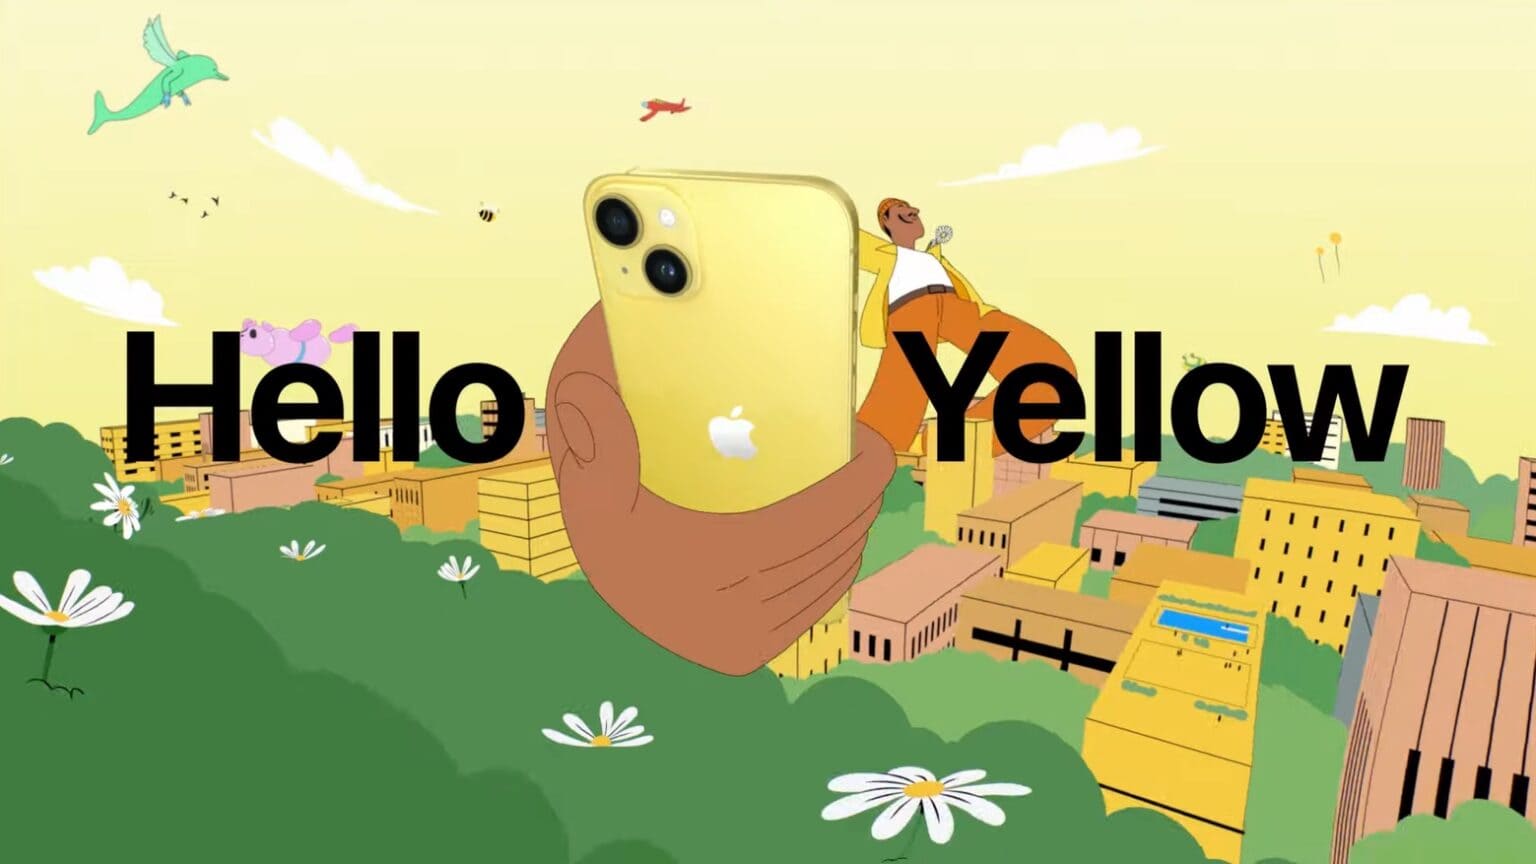 Trippy ad for yellow iPhone 14 feels like flashback to 1968